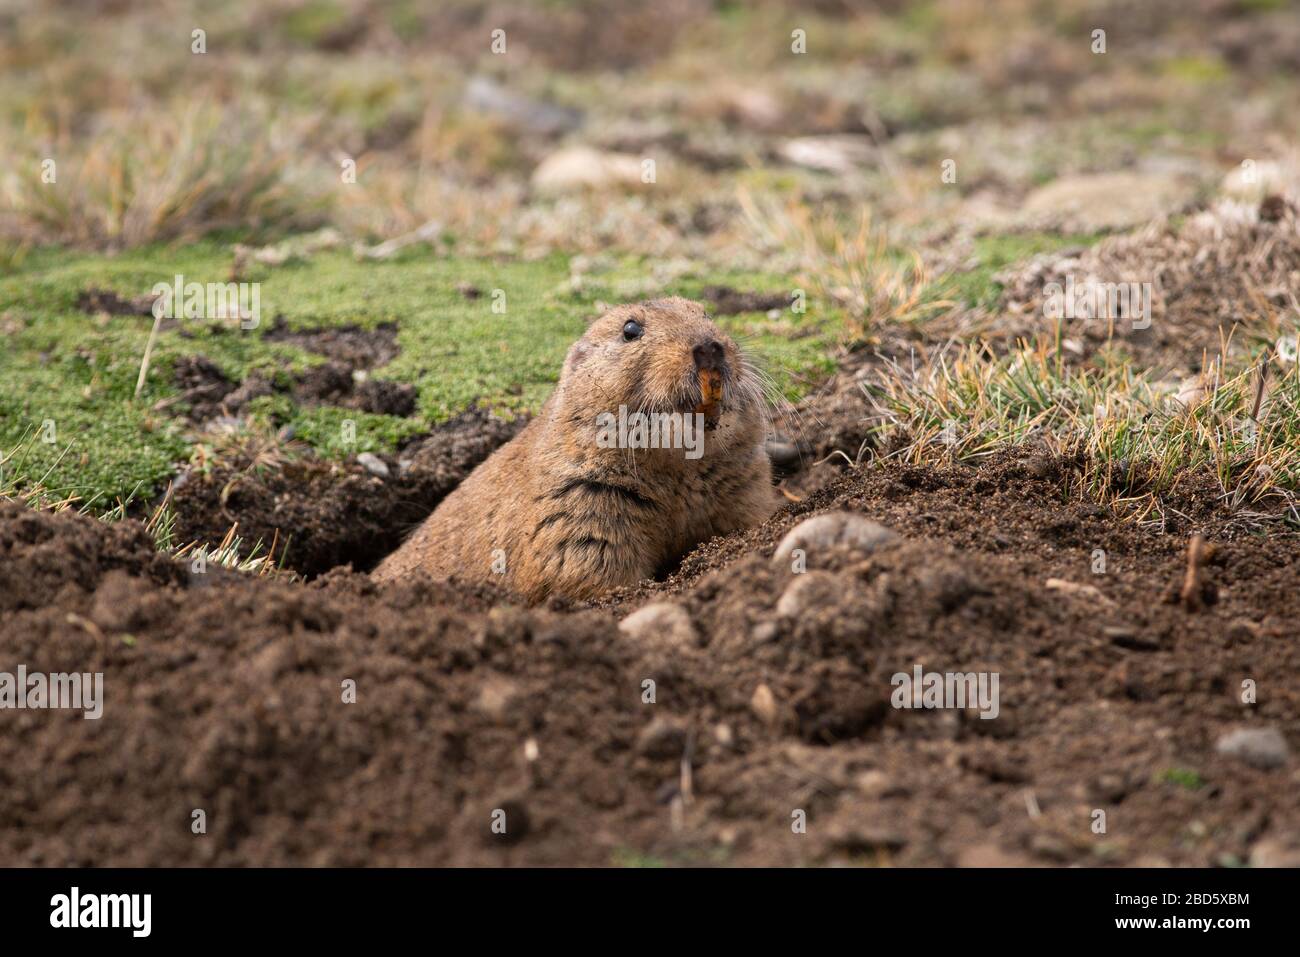 A Magellanic Tuco Tuco (Ctenomys magellanicus) just outside of its ground burrow in Tierra del Fuego Stock Photo